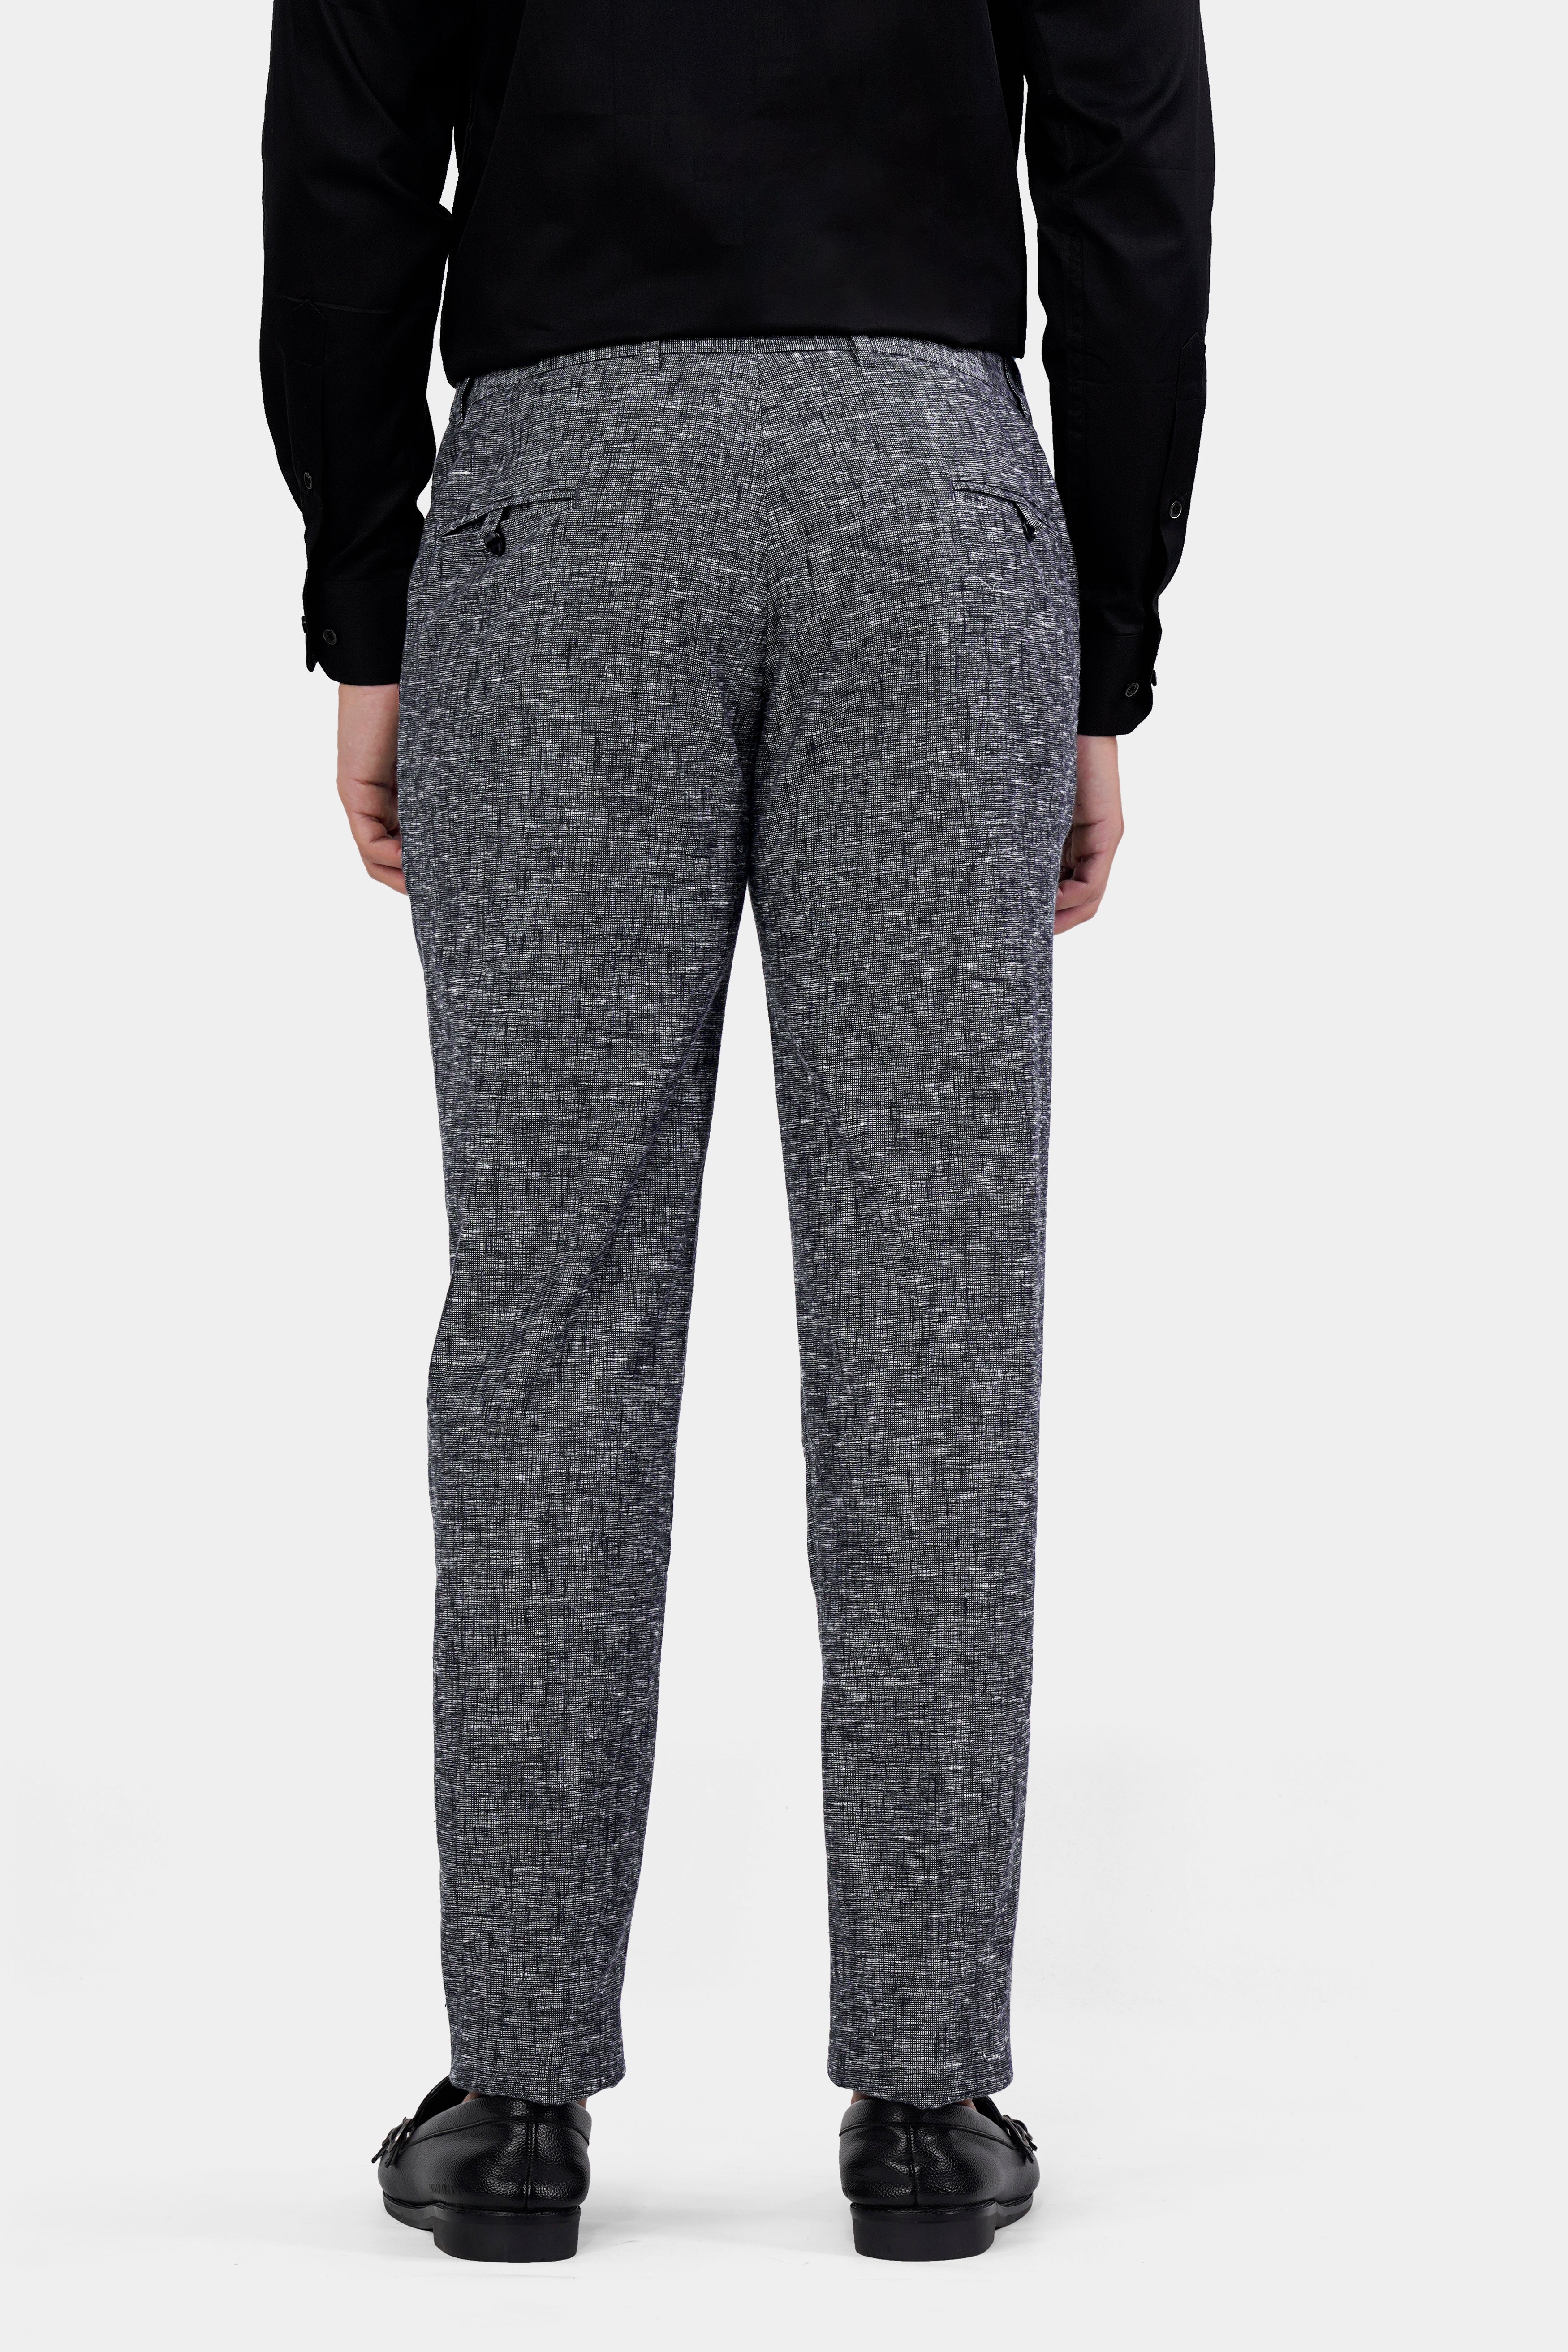 Arsenic Gray Luxurious Linen Pant T2922-SW-28, T2922-SW-30, T2922-SW-32, T2922-SW-34, T2922-SW-36, T2922-SW-38, T2922-SW-40, T2922-SW-42, T2922-SW-44